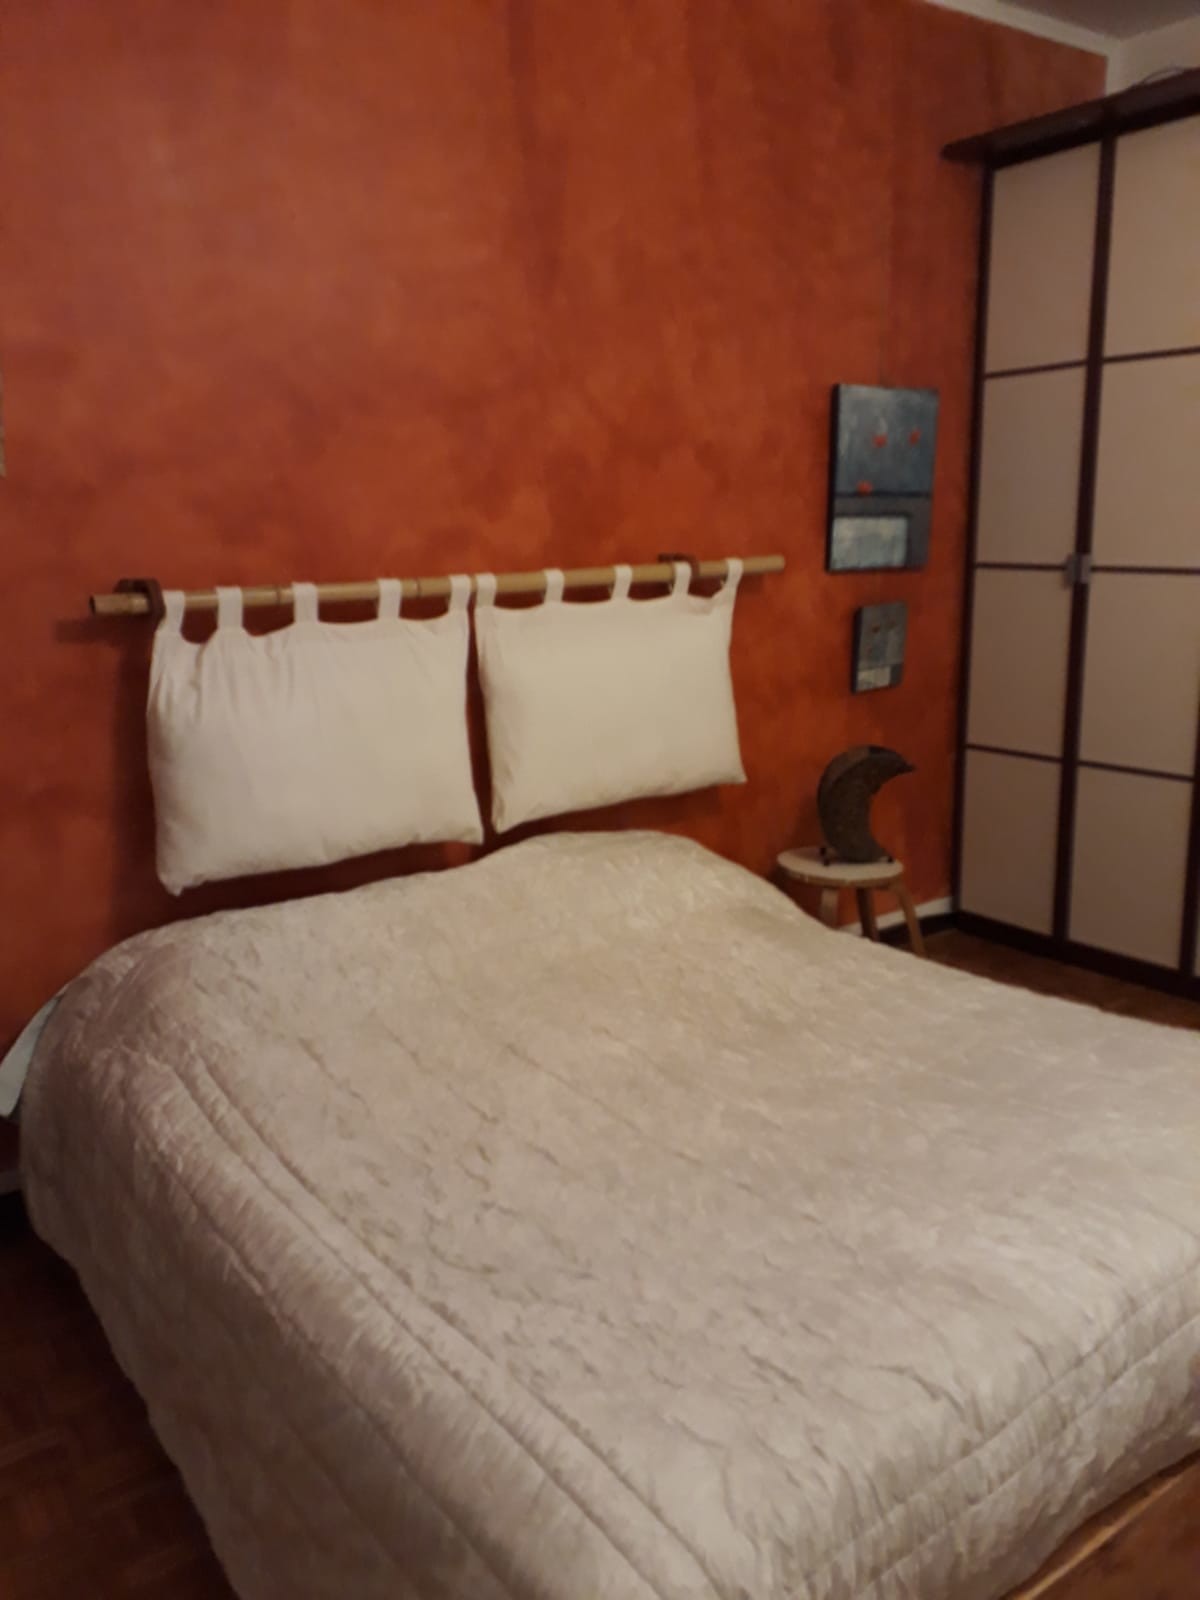 Room For Rent In Padua Share This Stunning Apartment With